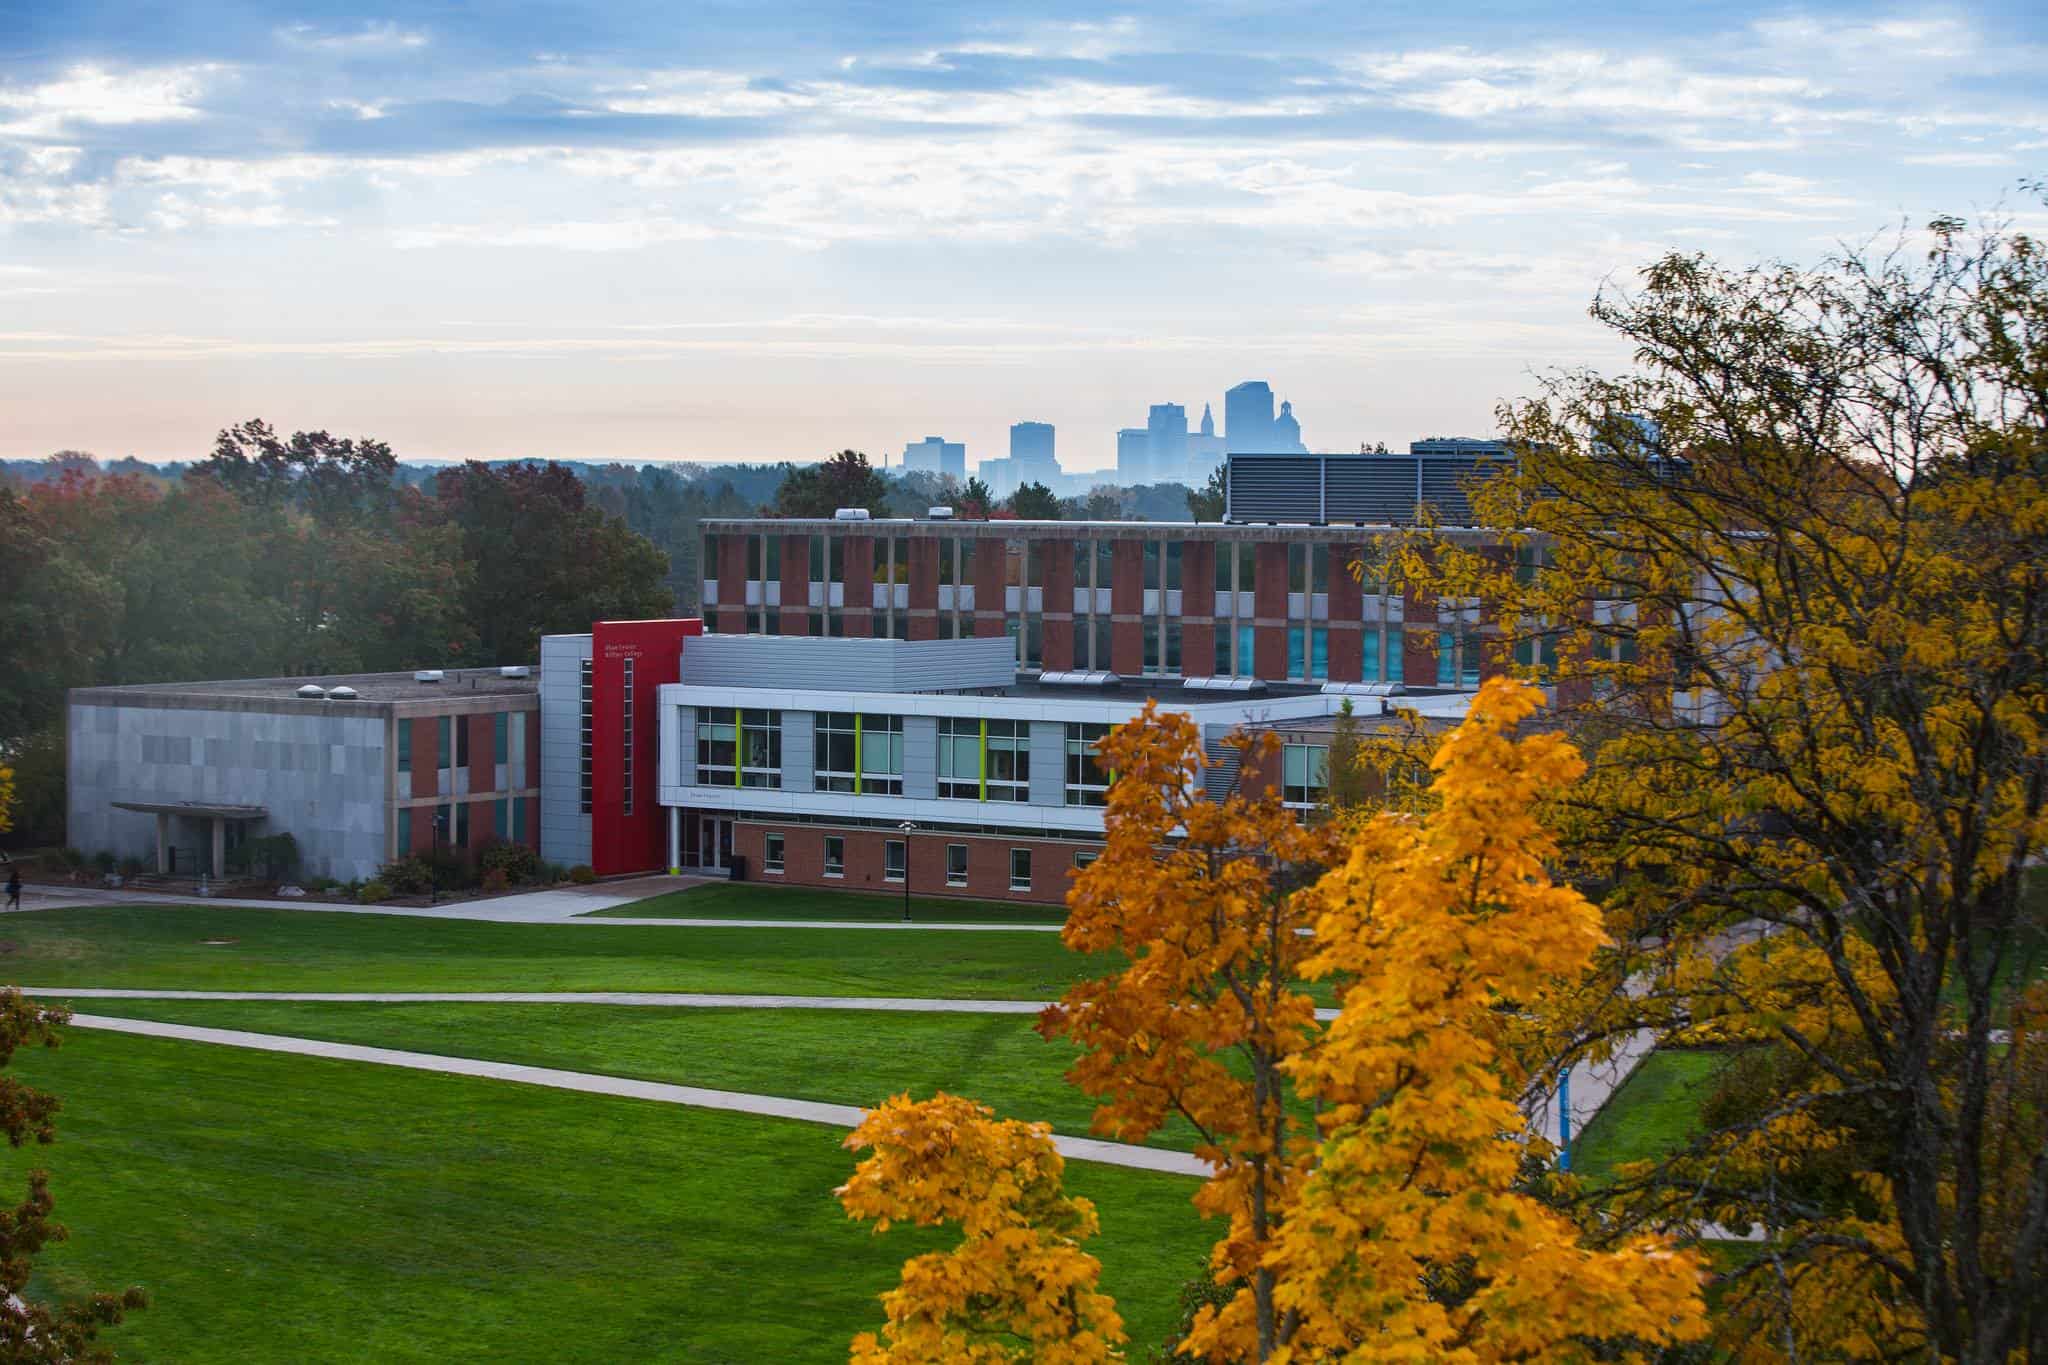 University of Hartford Rankings, Tuition, Acceptance Rate, etc.